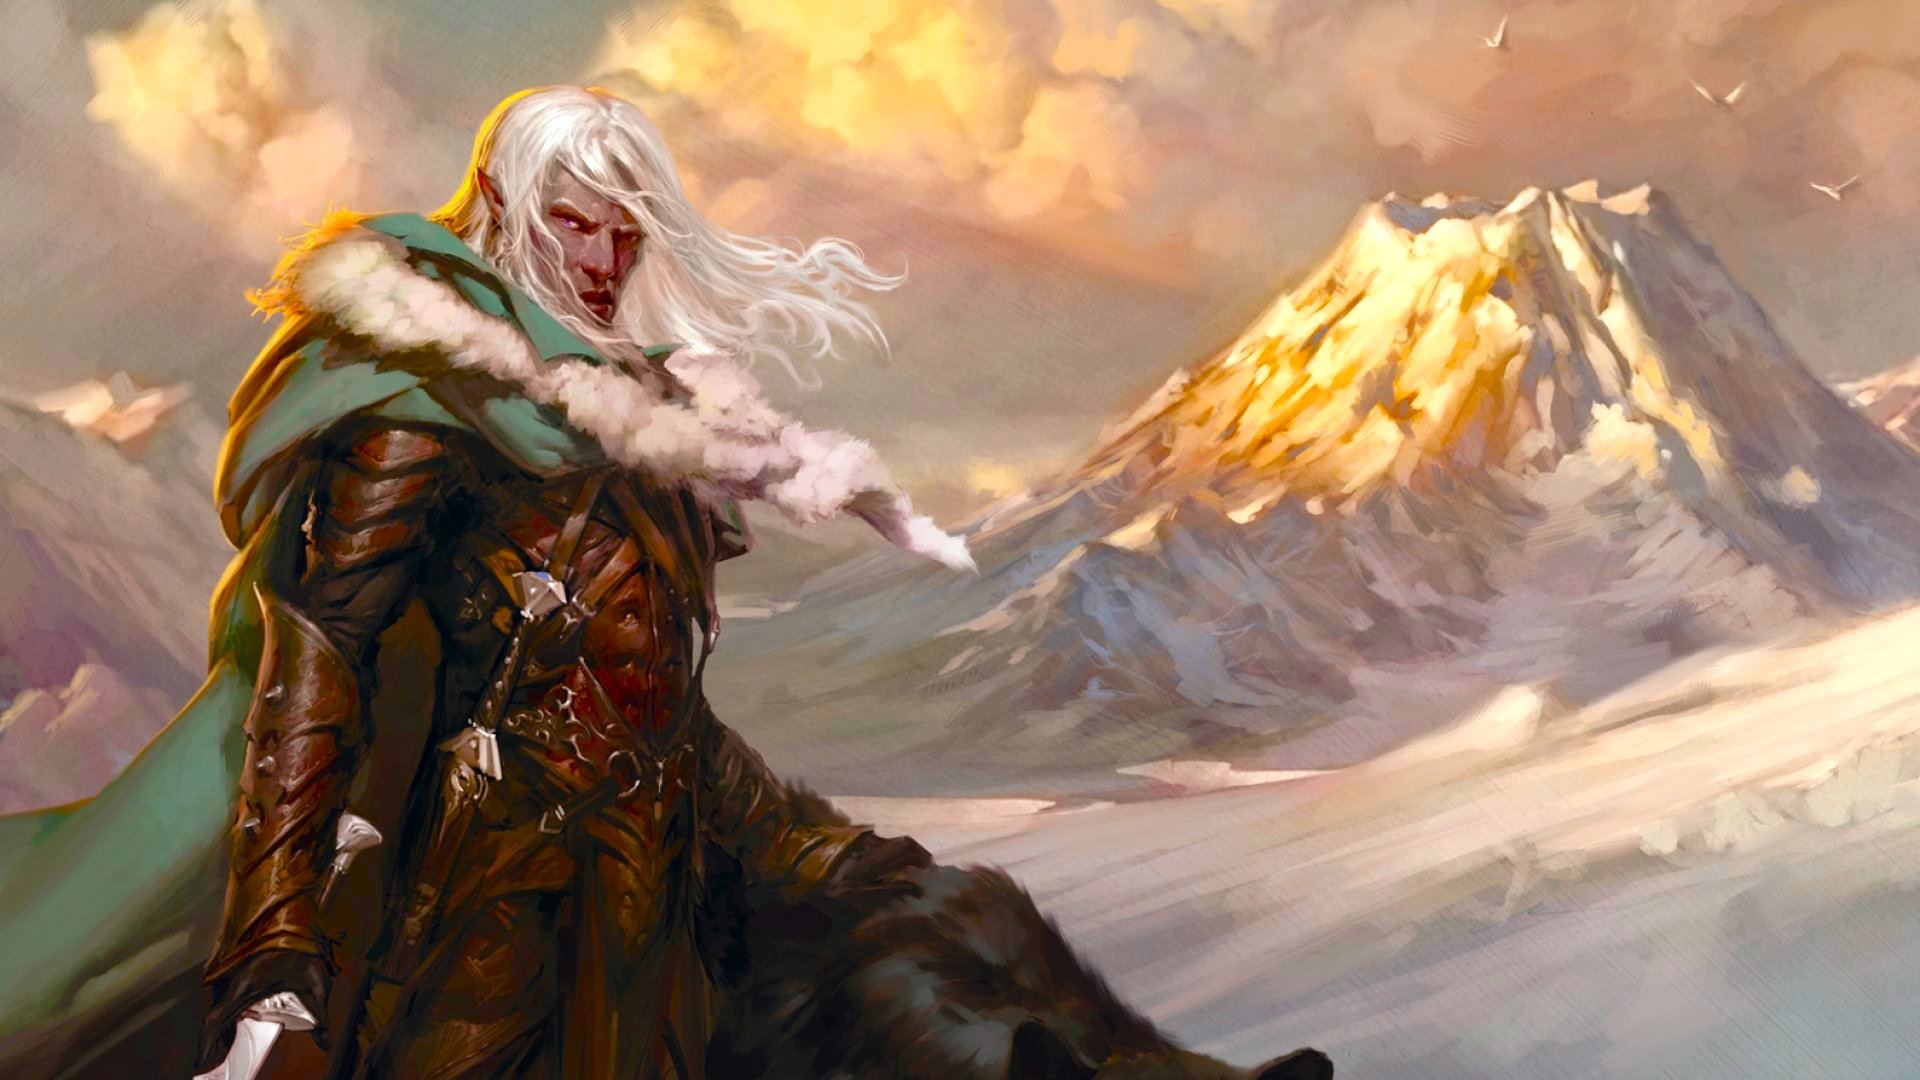 DnD Blood Hunter 5e - warrior in leather armour and a green cloak stands in front of a mountain (art by Wizards of the Coast)